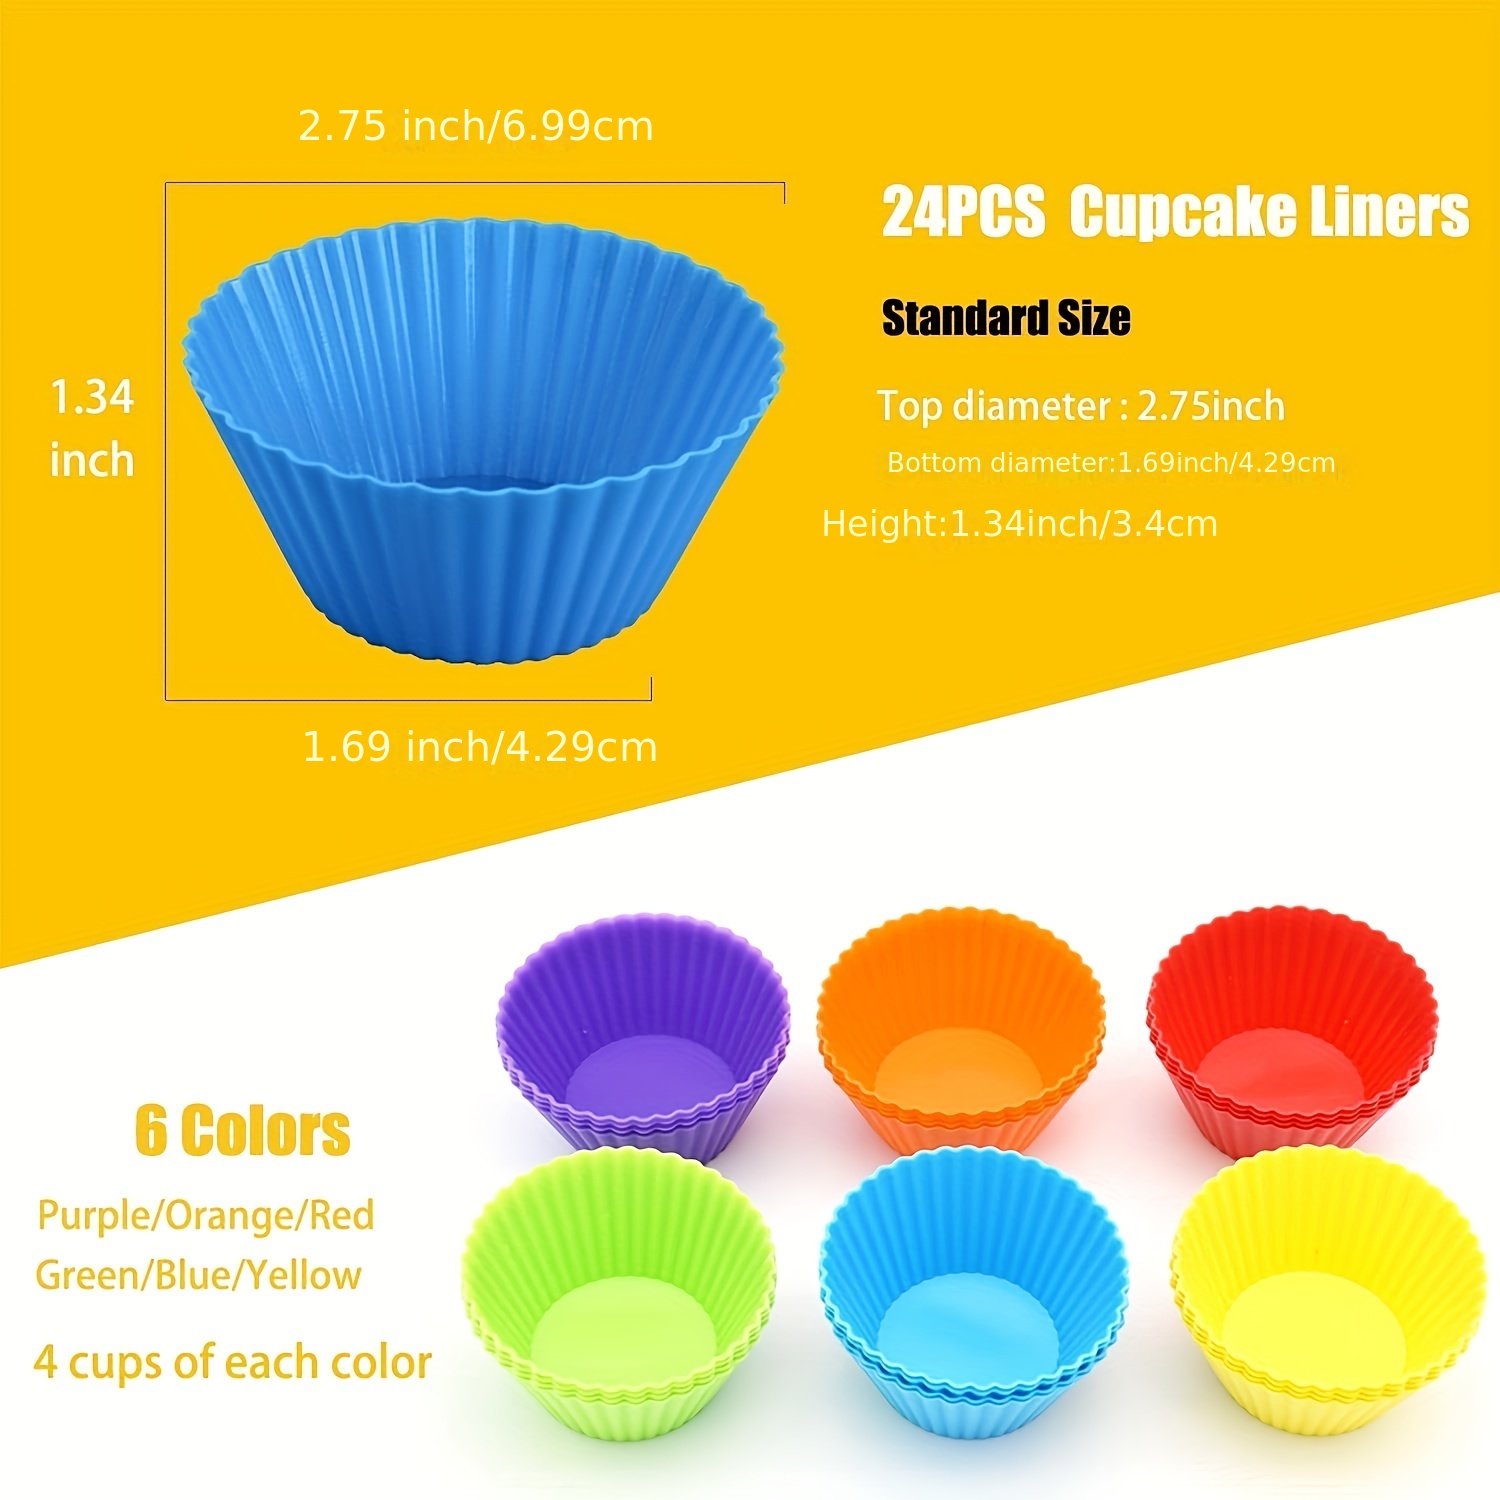 Silicone Cupcake Liners Reusable Baking Cups Nonstick Easy Clean